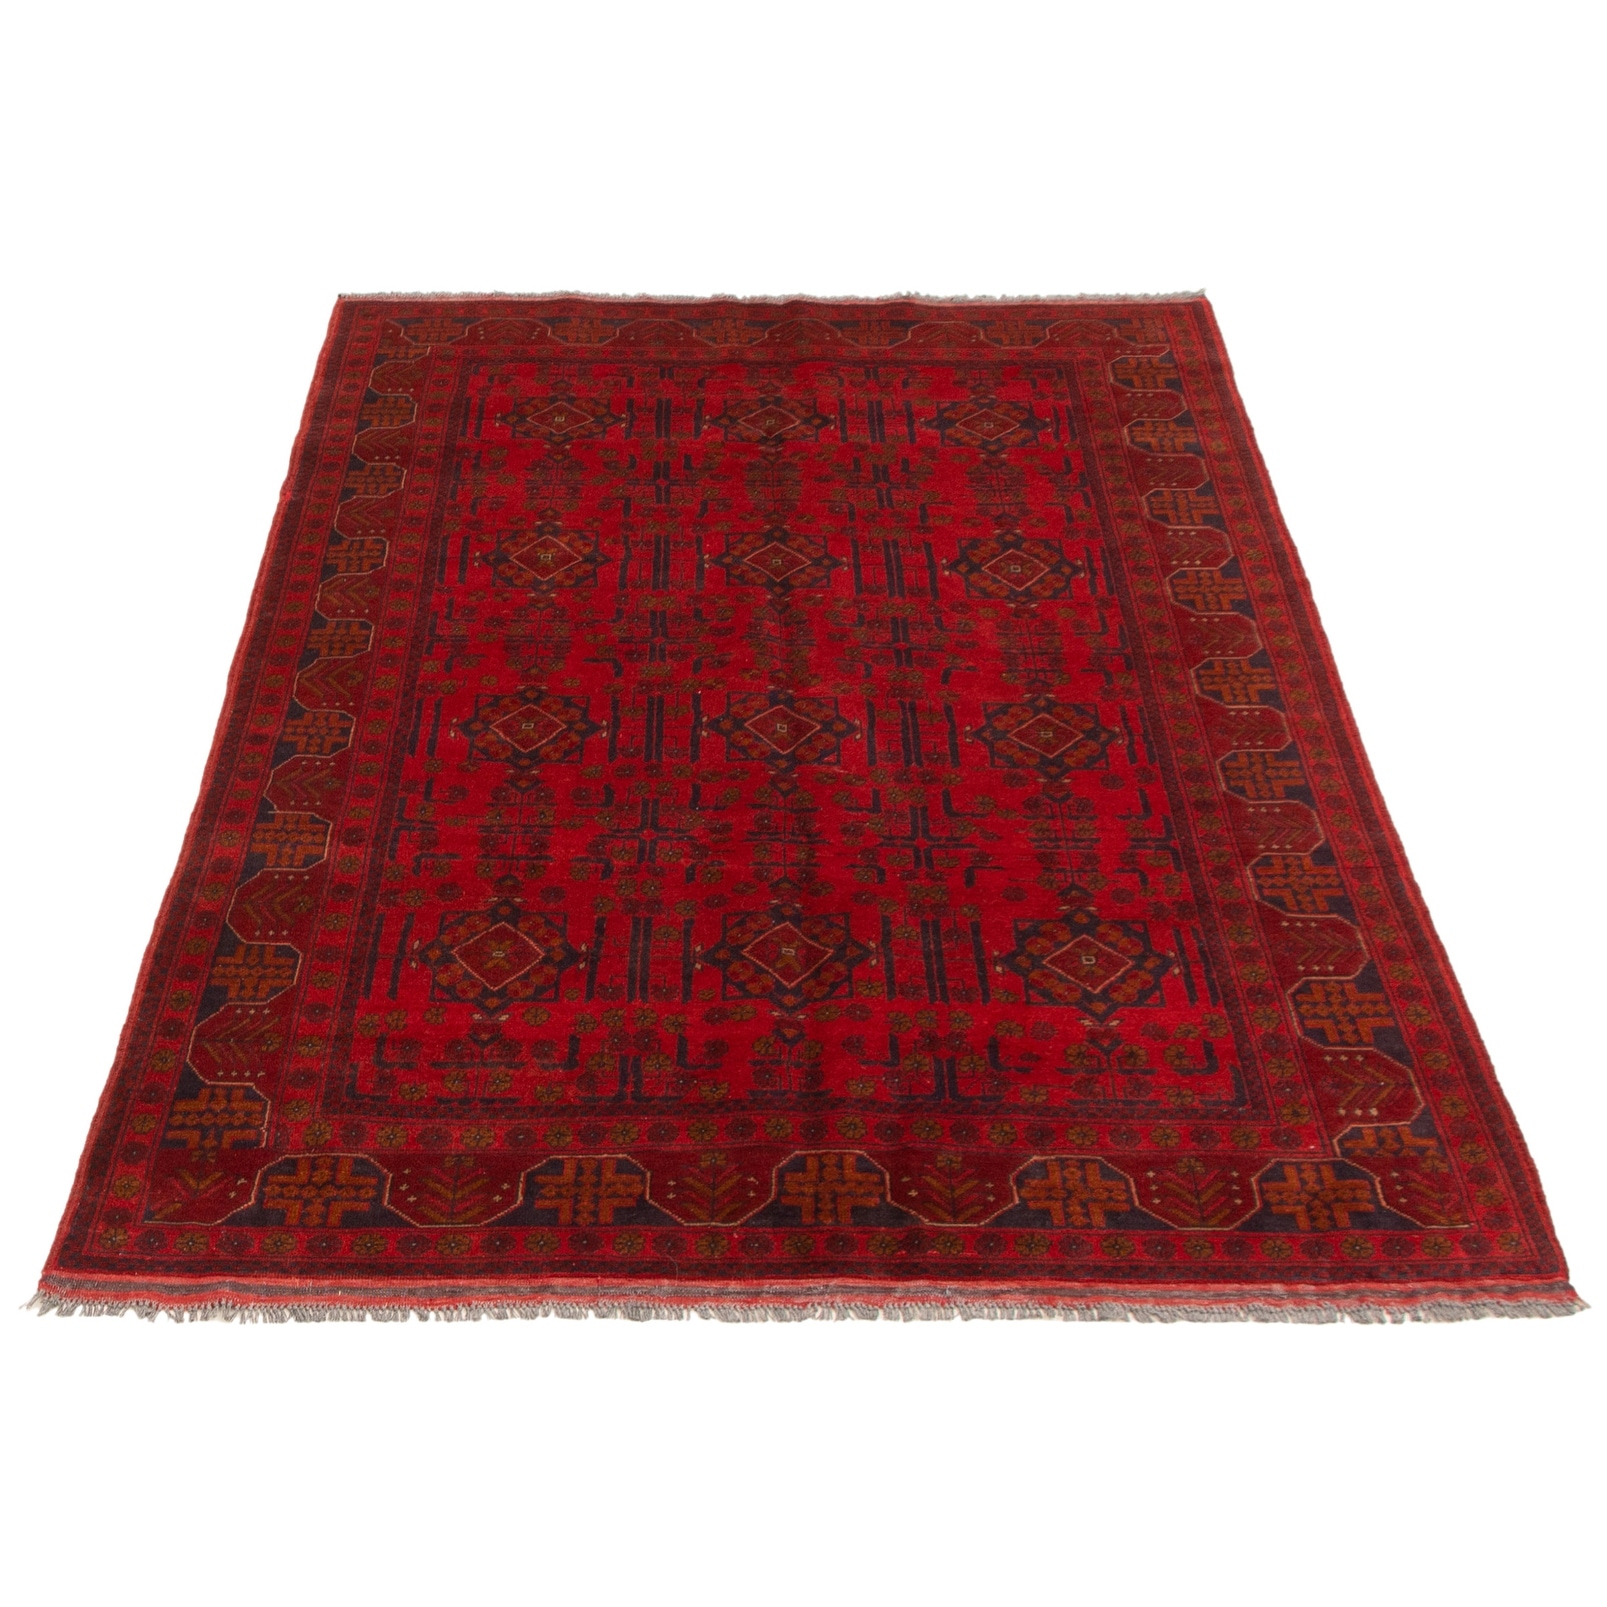 360410 Finest Khal Mohammadi Bordered Red Rug 5'9 x 8'0 Hand-Knotted Wool Rug Bedroom eCarpet Gallery Area Rug for Living Room 